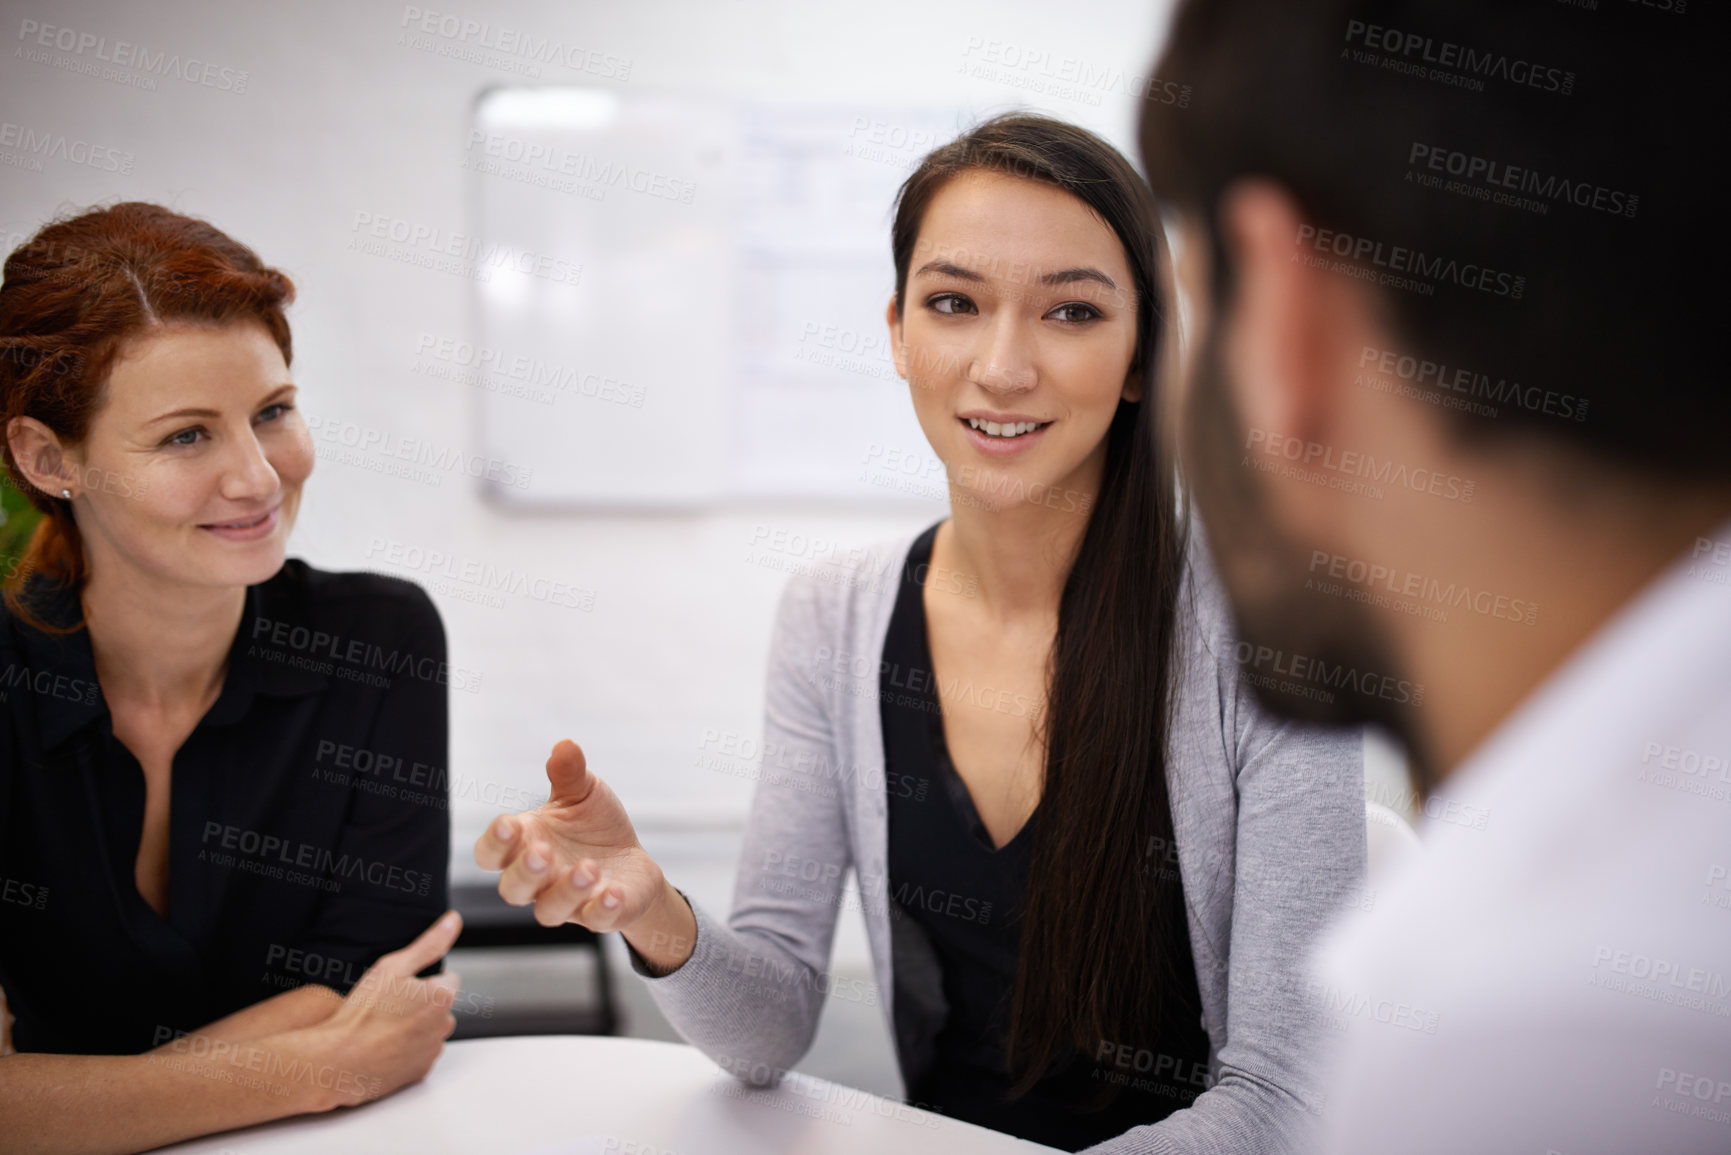 Buy stock photo Shot of businesspeople having a discussion in an office